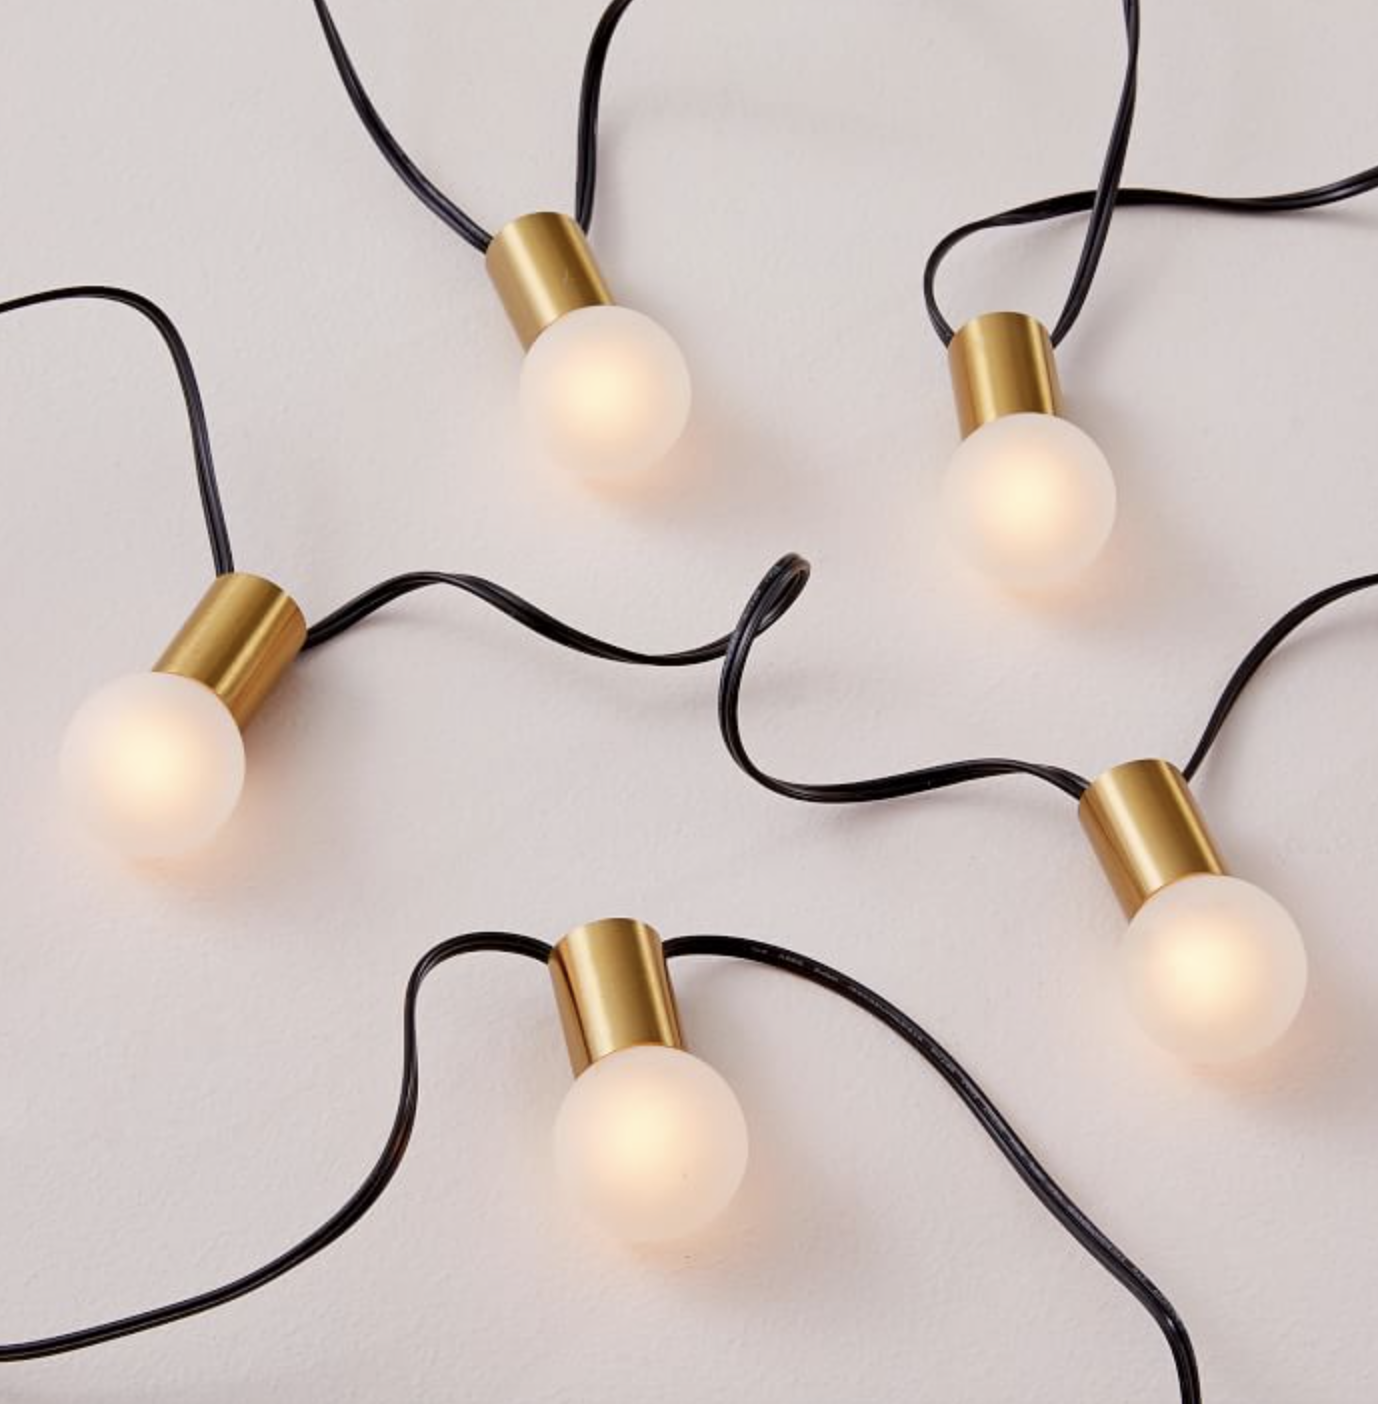 10 Best String Lights For Bedrooms, Indoor Hanging Lamps That Plug Into Wall